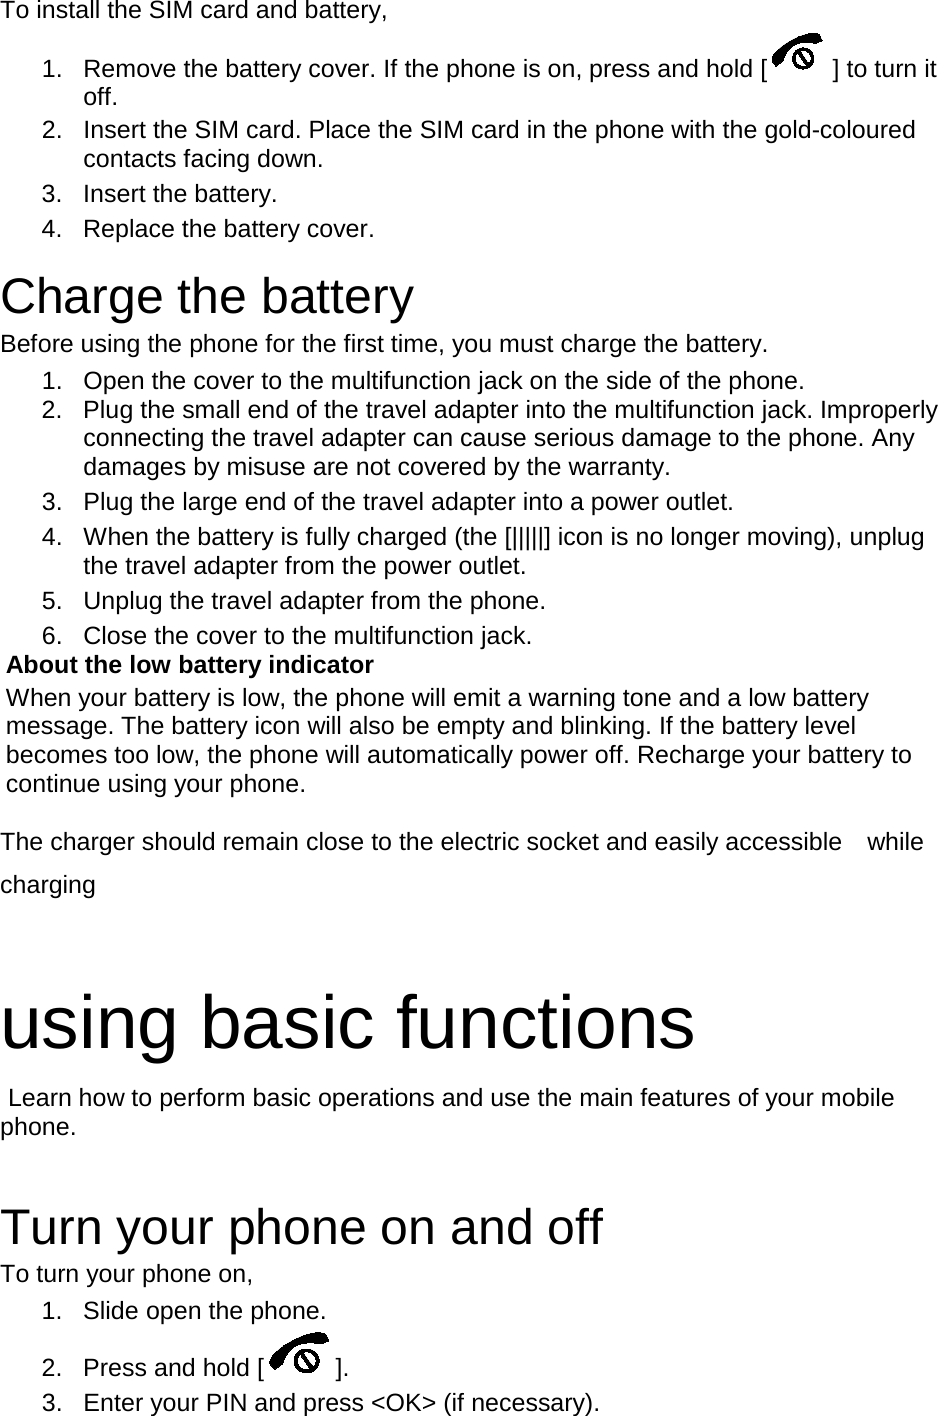 To install the SIM card and battery, 1. Remove the battery cover. If the phone is on, press and hold [ ] to turn it off. 2. Insert the SIM card. Place the SIM card in the phone with the gold-coloured contacts facing down. 3. Insert the battery. 4. Replace the battery cover.  Charge the battery Before using the phone for the first time, you must charge the battery. 1. Open the cover to the multifunction jack on the side of the phone. 2. Plug the small end of the travel adapter into the multifunction jack. Improperly connecting the travel adapter can cause serious damage to the phone. Any damages by misuse are not covered by the warranty. 3. Plug the large end of the travel adapter into a power outlet. 4. When the battery is fully charged (the [|||||] icon is no longer moving), unplug the travel adapter from the power outlet. 5. Unplug the travel adapter from the phone. 6. Close the cover to the multifunction jack. About the low battery indicator When your battery is low, the phone will emit a warning tone and a low battery message. The battery icon will also be empty and blinking. If the battery level becomes too low, the phone will automatically power off. Recharge your battery to continue using your phone. The charger should remain close to the electric socket and easily accessible    while charging  using basic functions  Learn how to perform basic operations and use the main features of your mobile phone.    Turn your phone on and off To turn your phone on, 1. Slide open the phone. 2. Press and hold [ ]. 3. Enter your PIN and press &lt;OK&gt; (if necessary). 